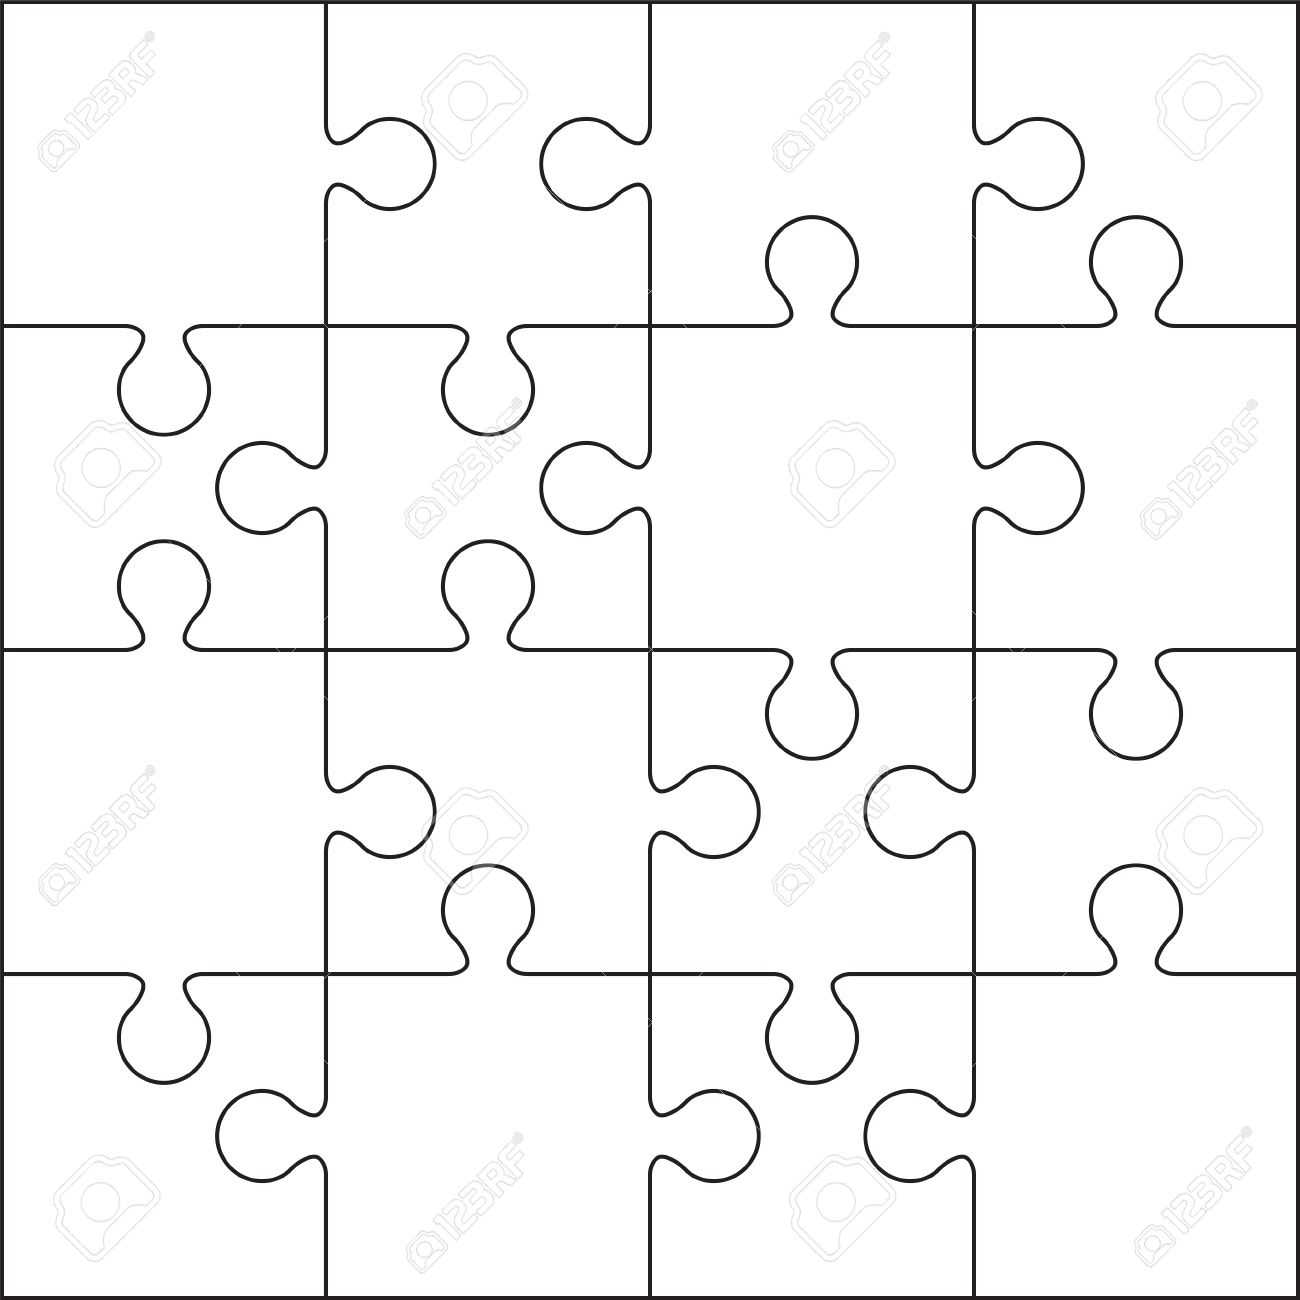 16 Jigsaw Puzzle Blank Template Or Cutting Guidelines With Blank Jigsaw Piece Template